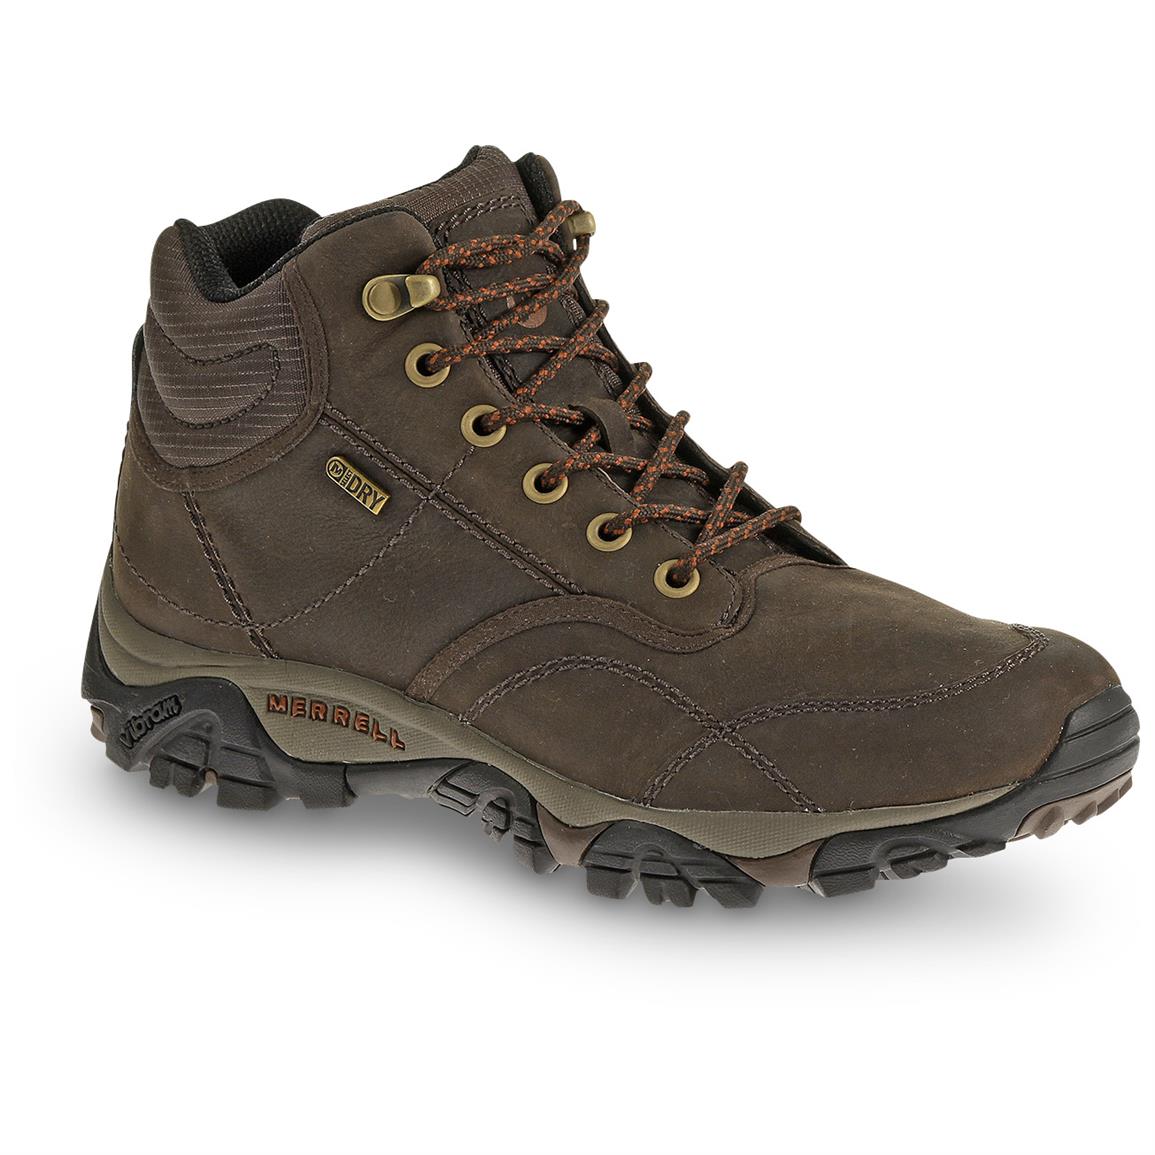 Merrell Men's Rover Mid Waterproof Boots - 617446, Hiking Boots & Shoes ...